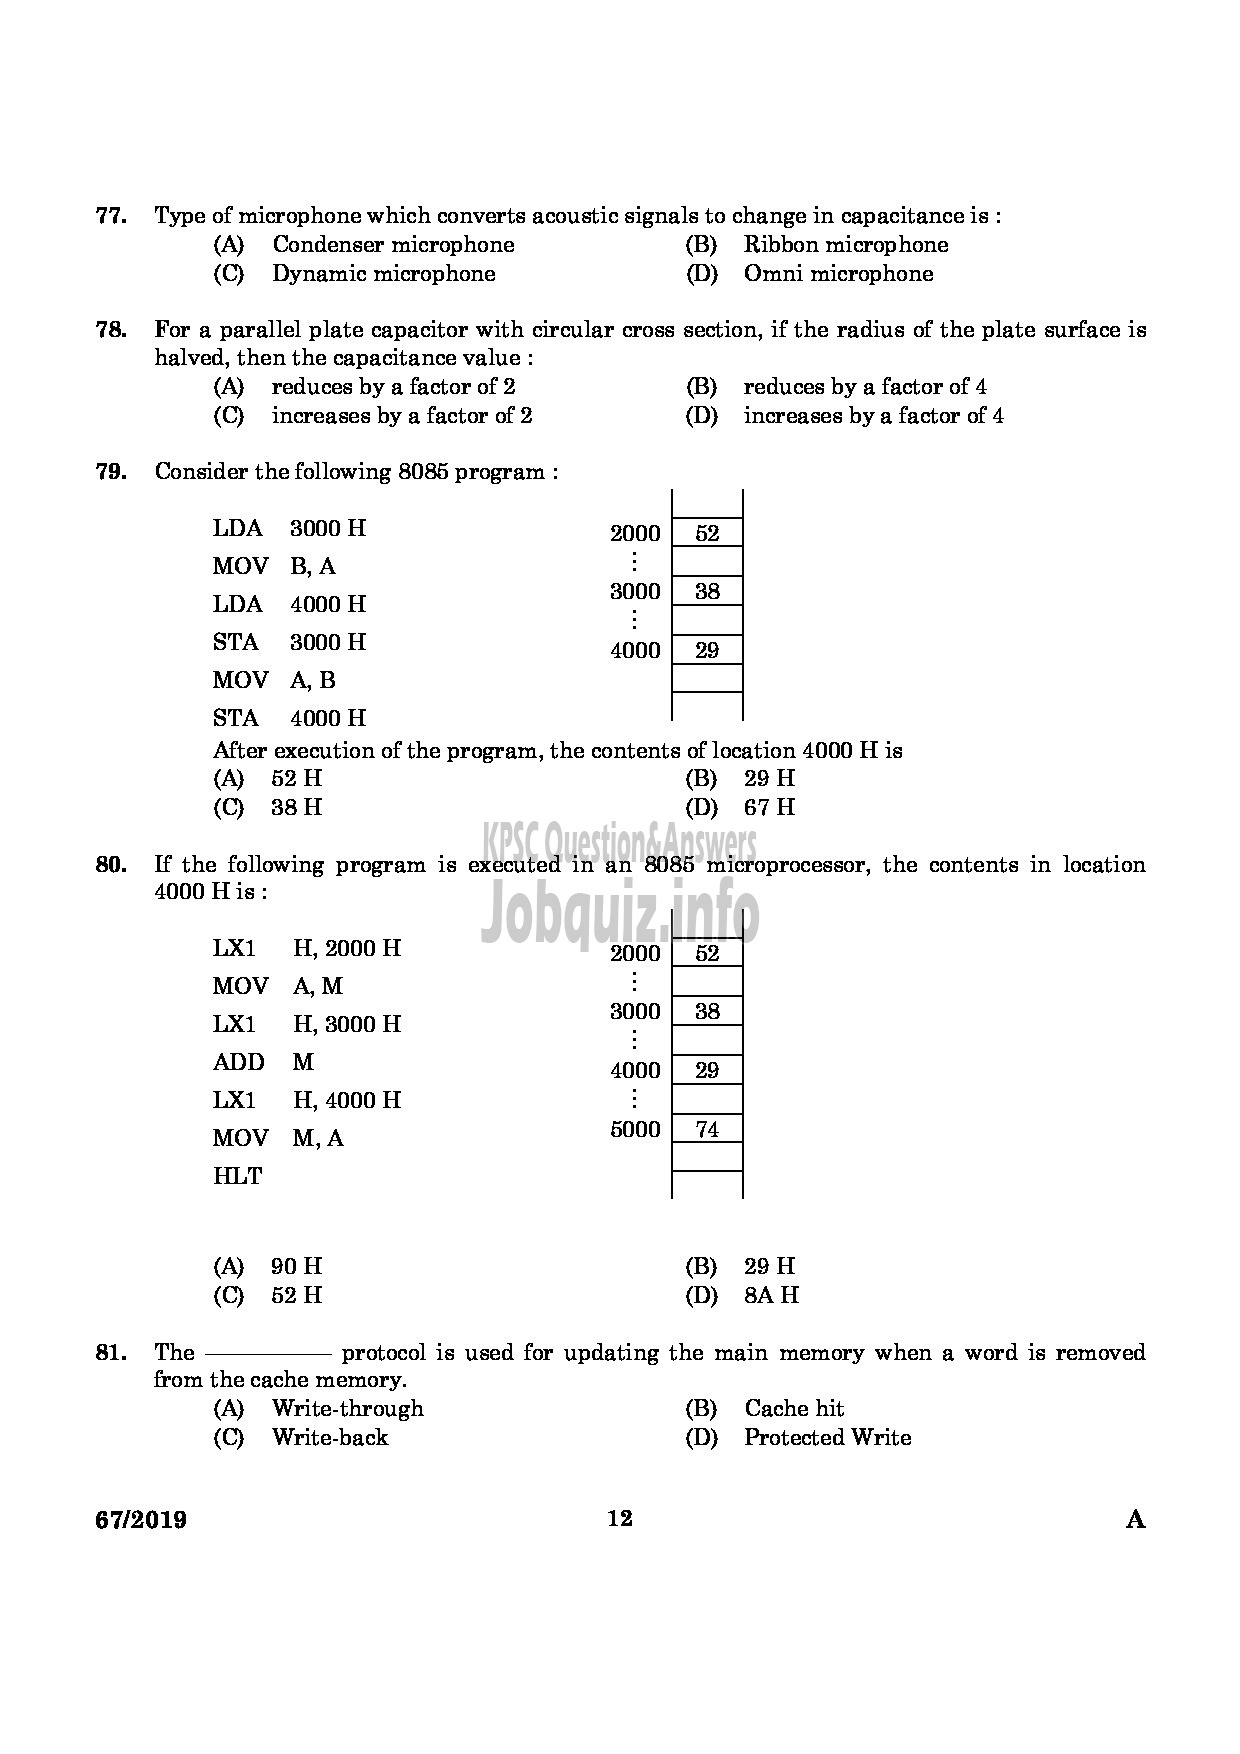 Kerala PSC Question Paper - Industries Extension Officer Industries And Commerce English -10